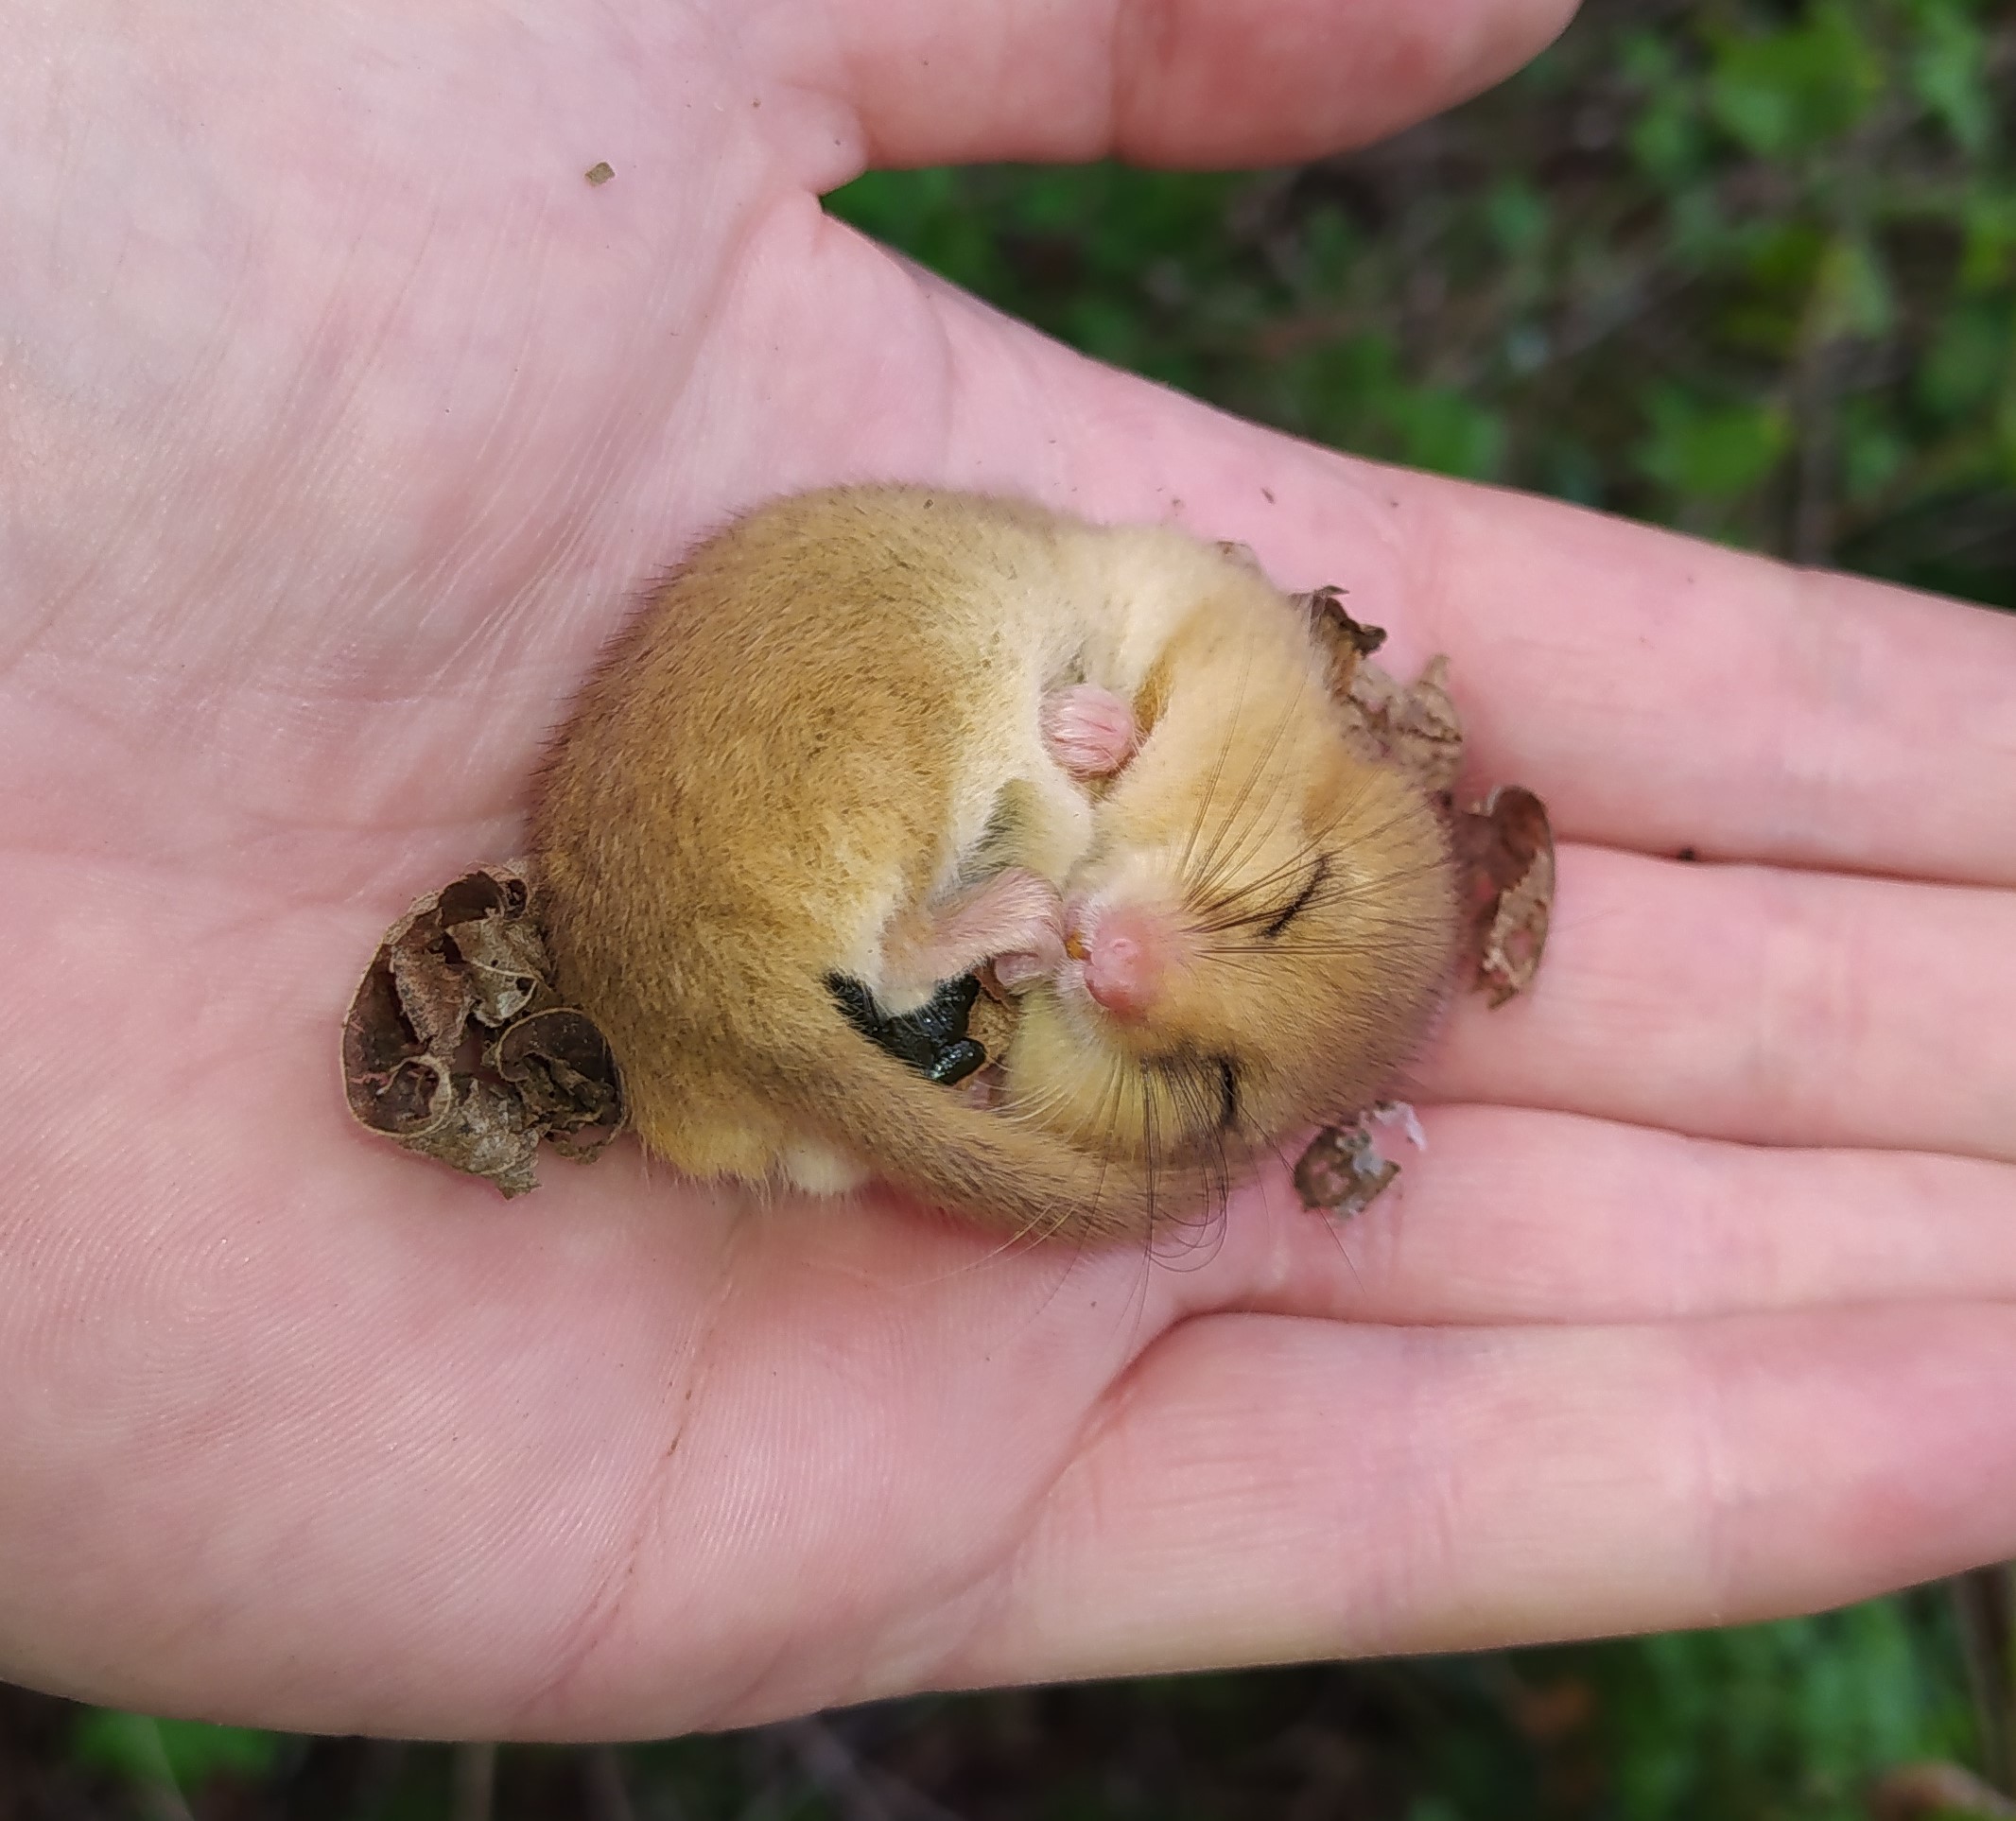 animal habitats_Dormouse lies rolled up on hand with green background